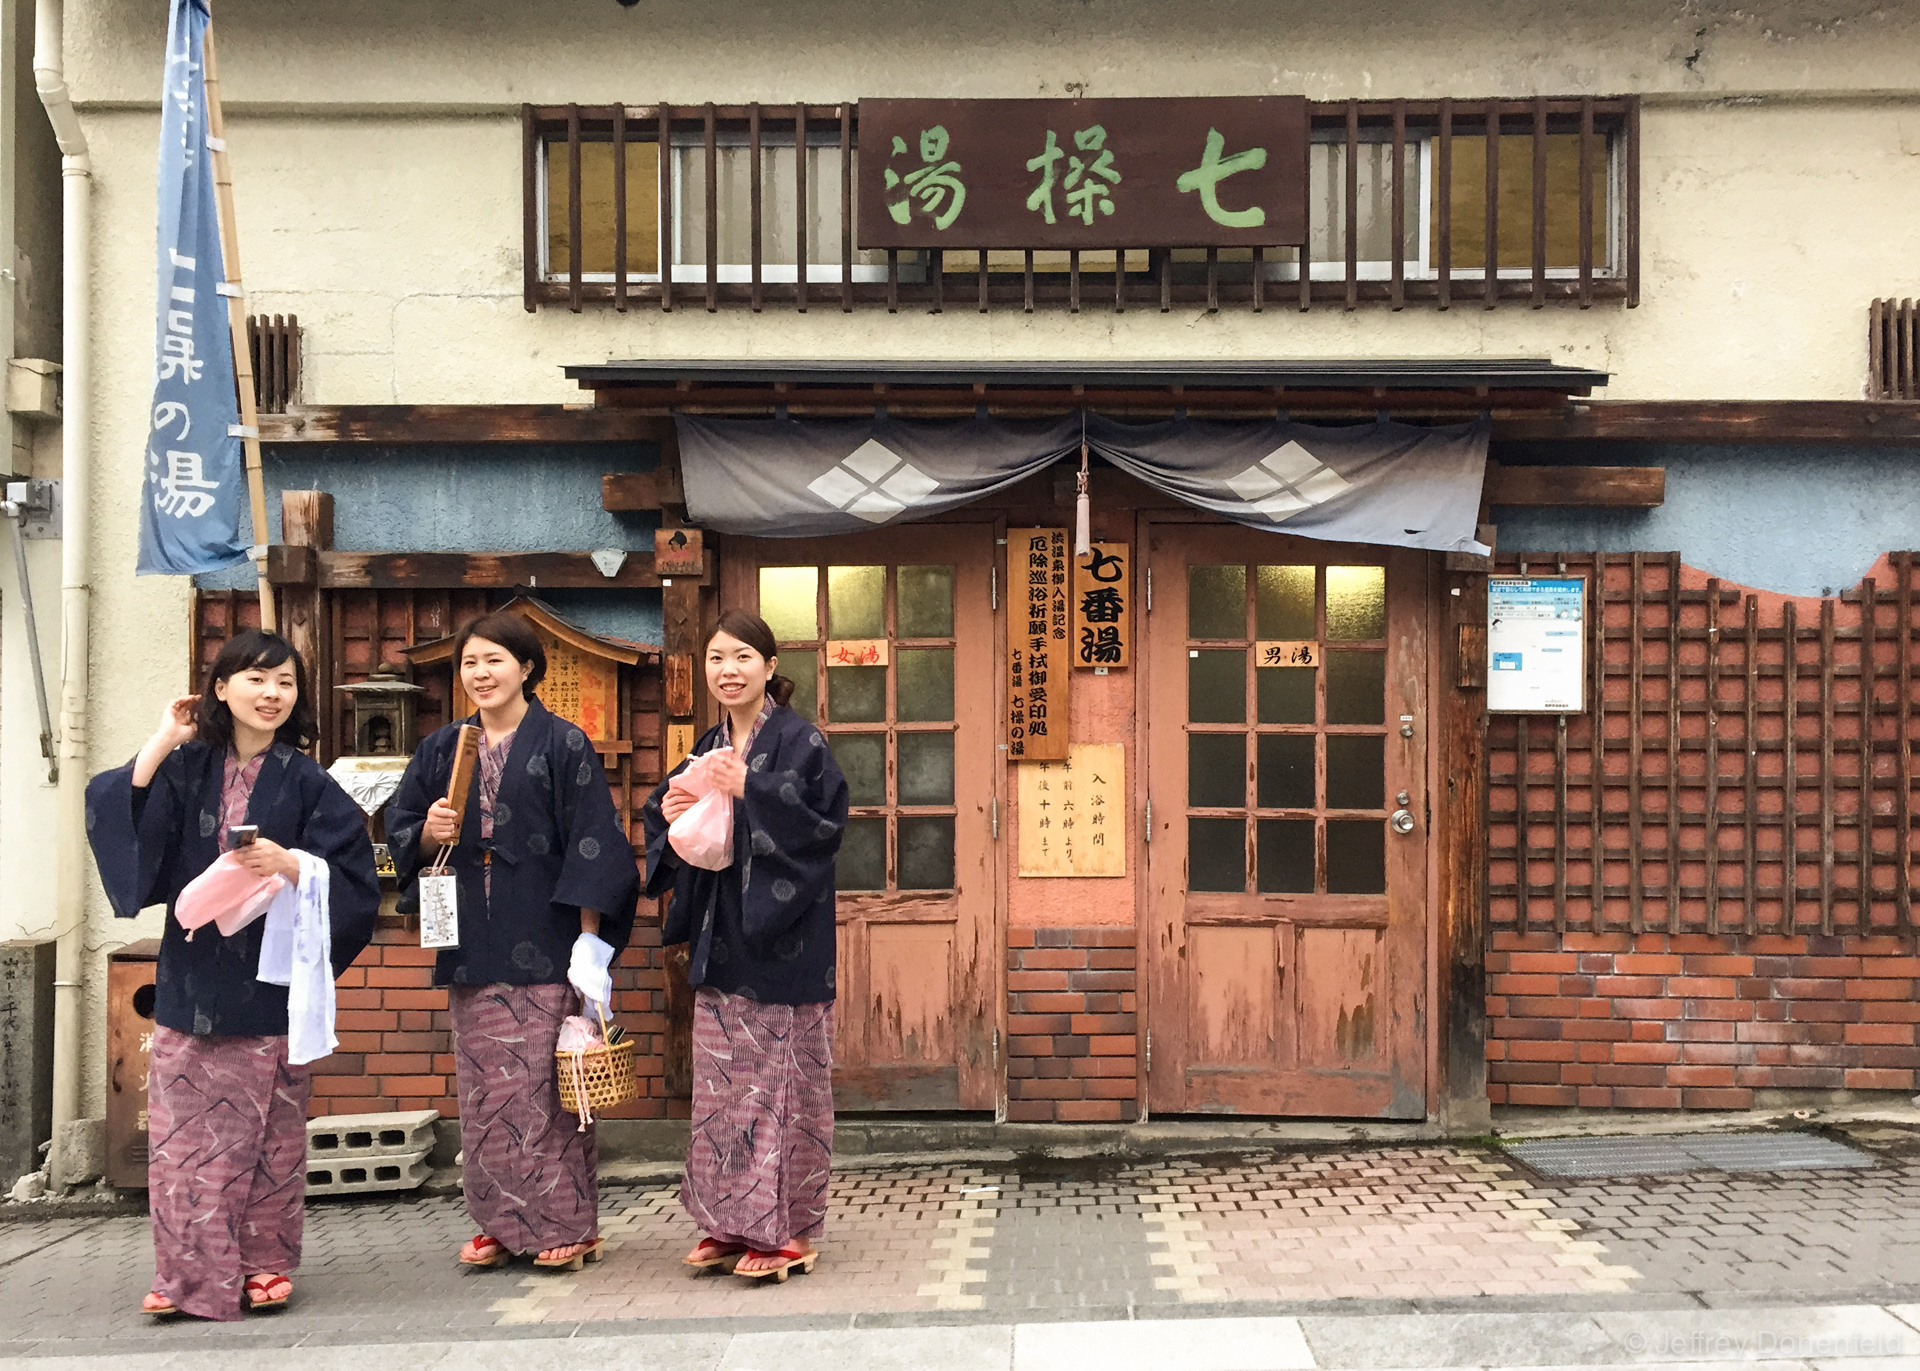 The onsen path is popular, and people show up in all sorts of nice robes. You can also see these women are wearing the traditional wodden onsen flip flops. They're not super comfortable, but it is possible to walk around town in them. The two wood bars on the bottom facilitate a rocking motion when walking.